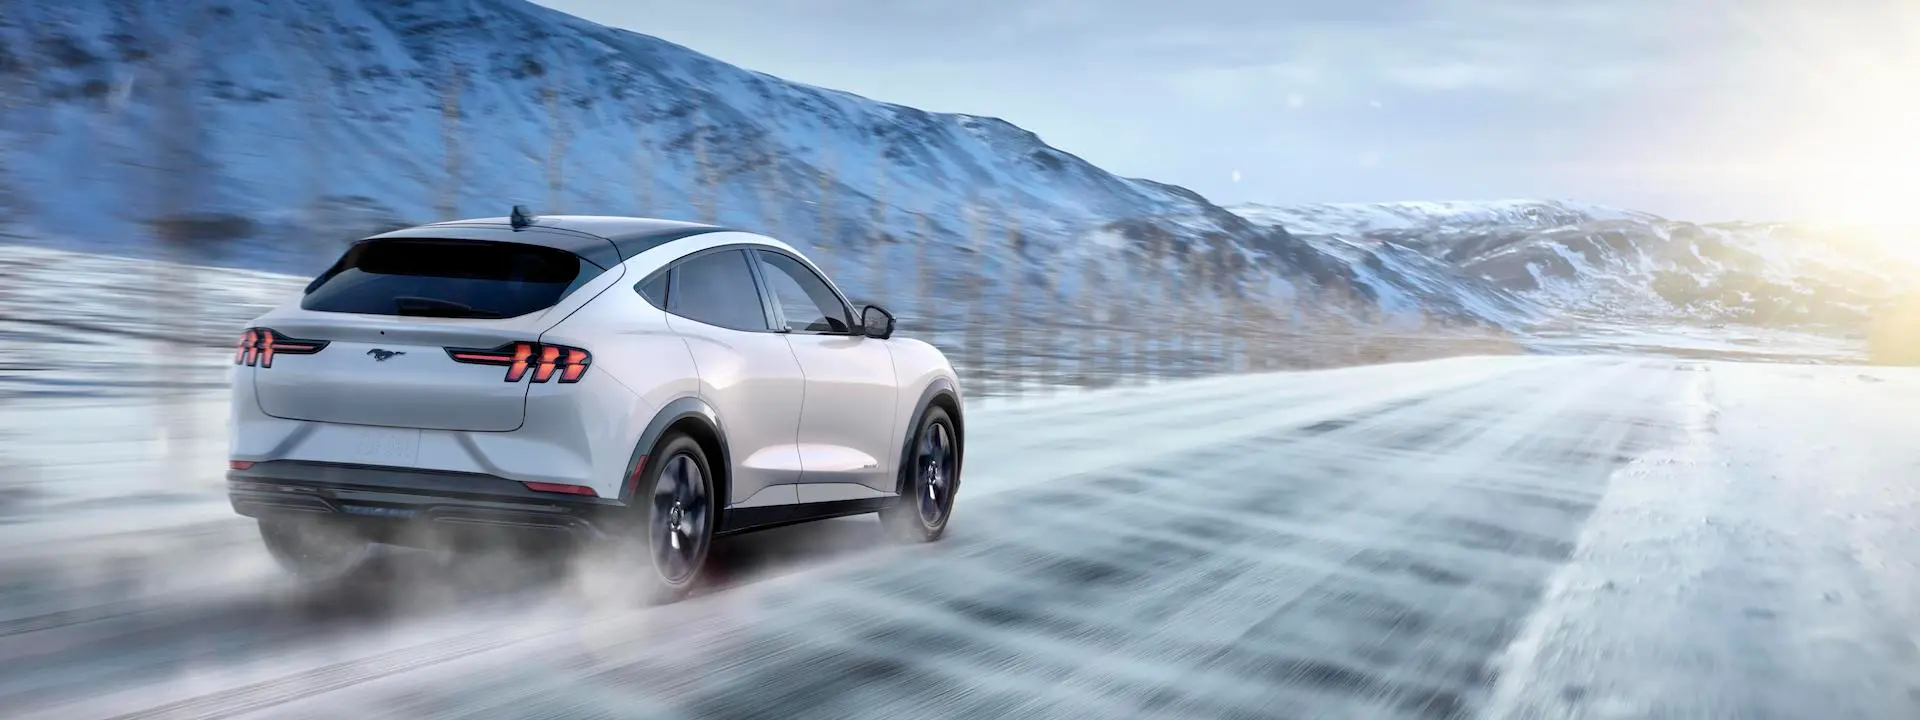 Are Electric Cars Good In Snow